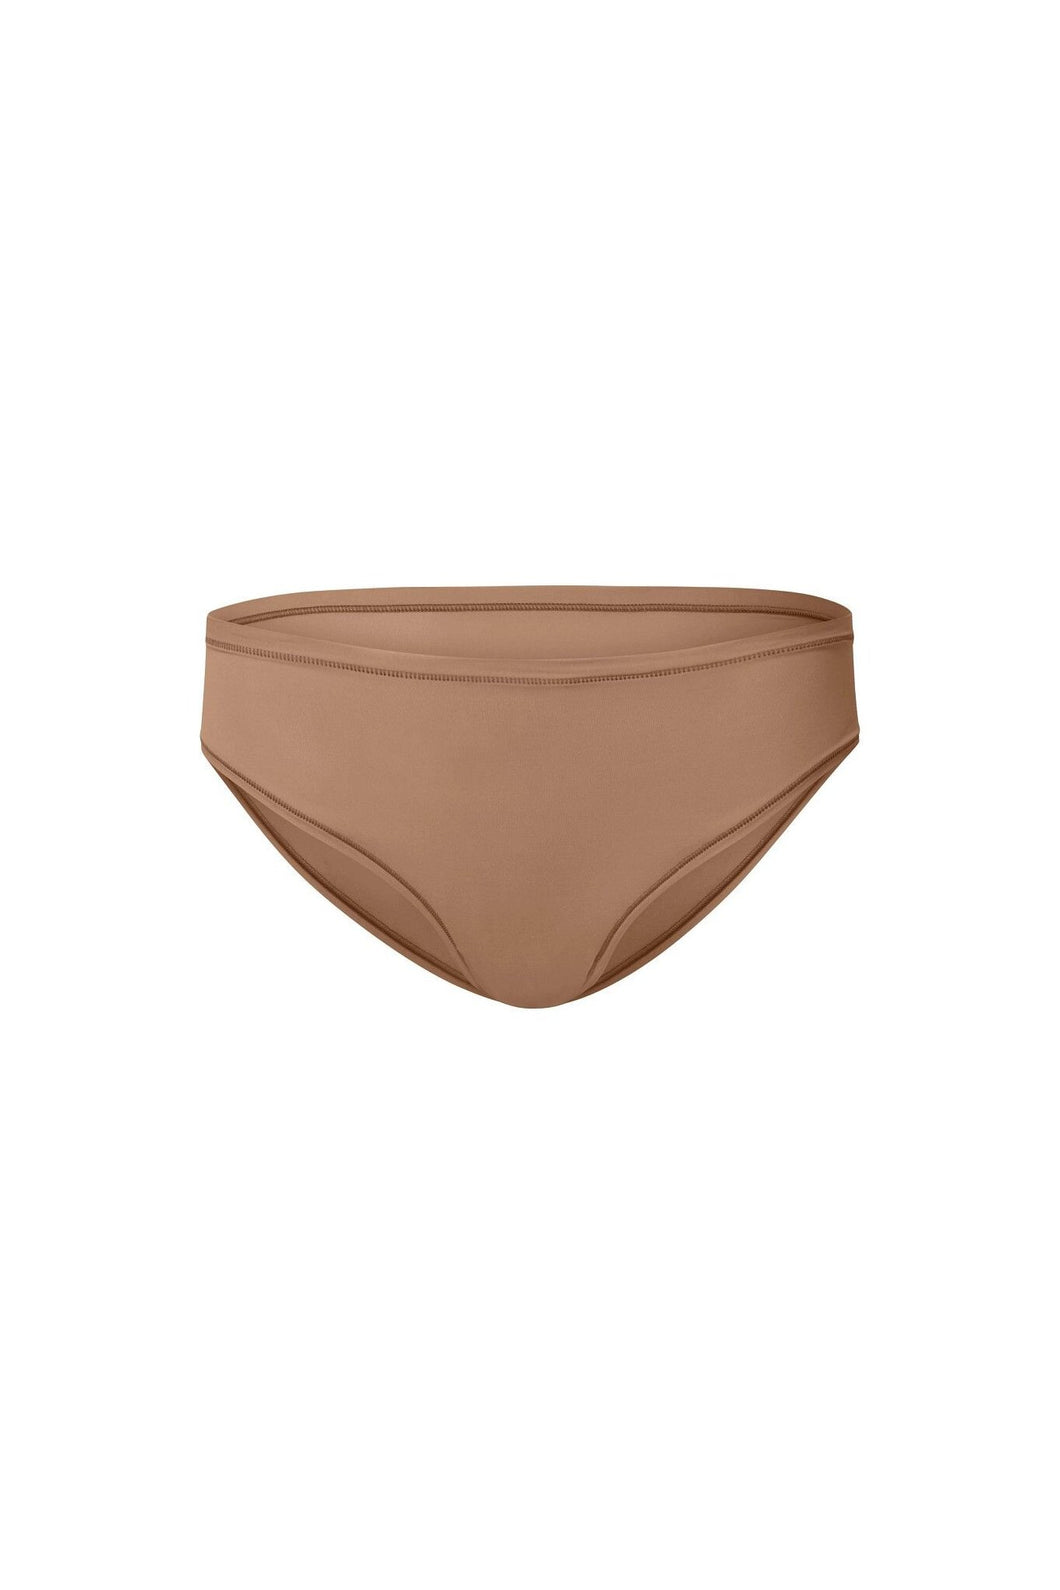 nueskin Mindy in color Macaroon and shape midi brief